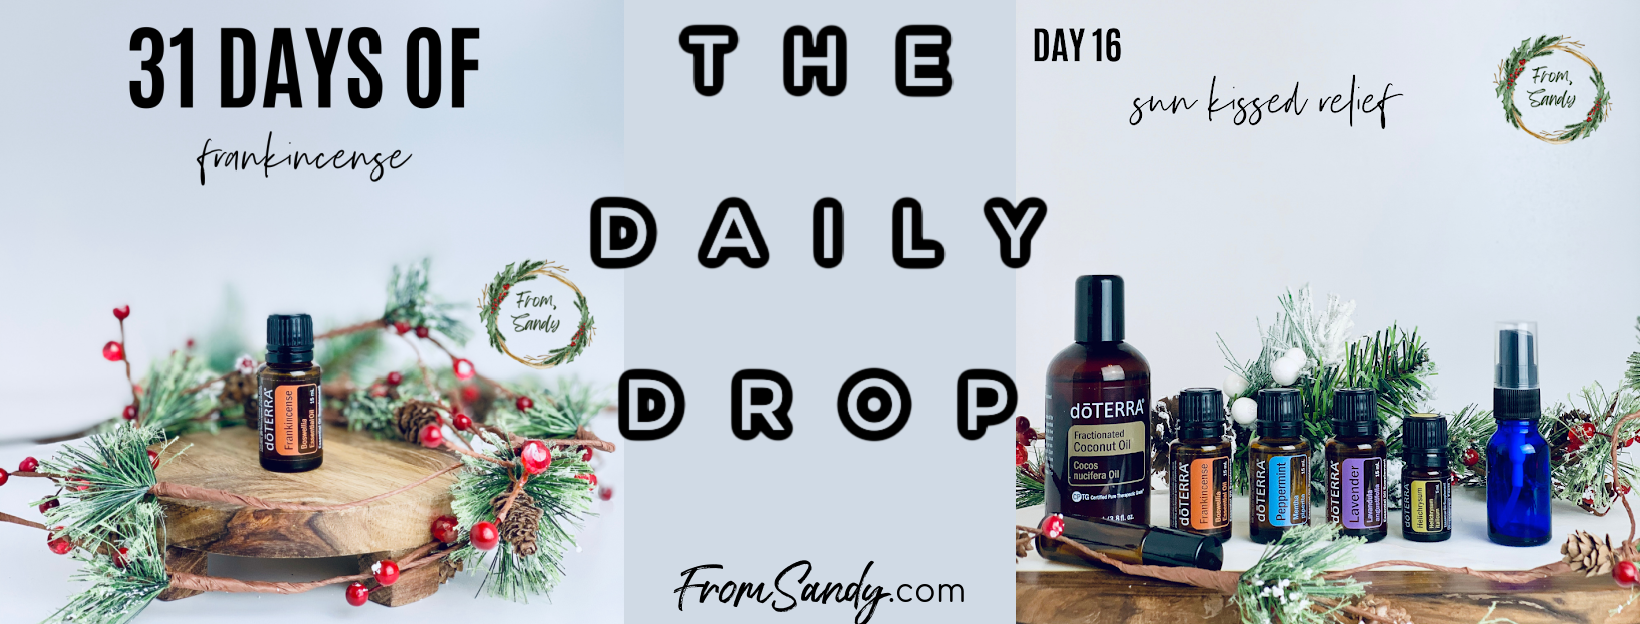 Sun Kissed Relief (31 Days of Frankincense: Day 16), From Sandy